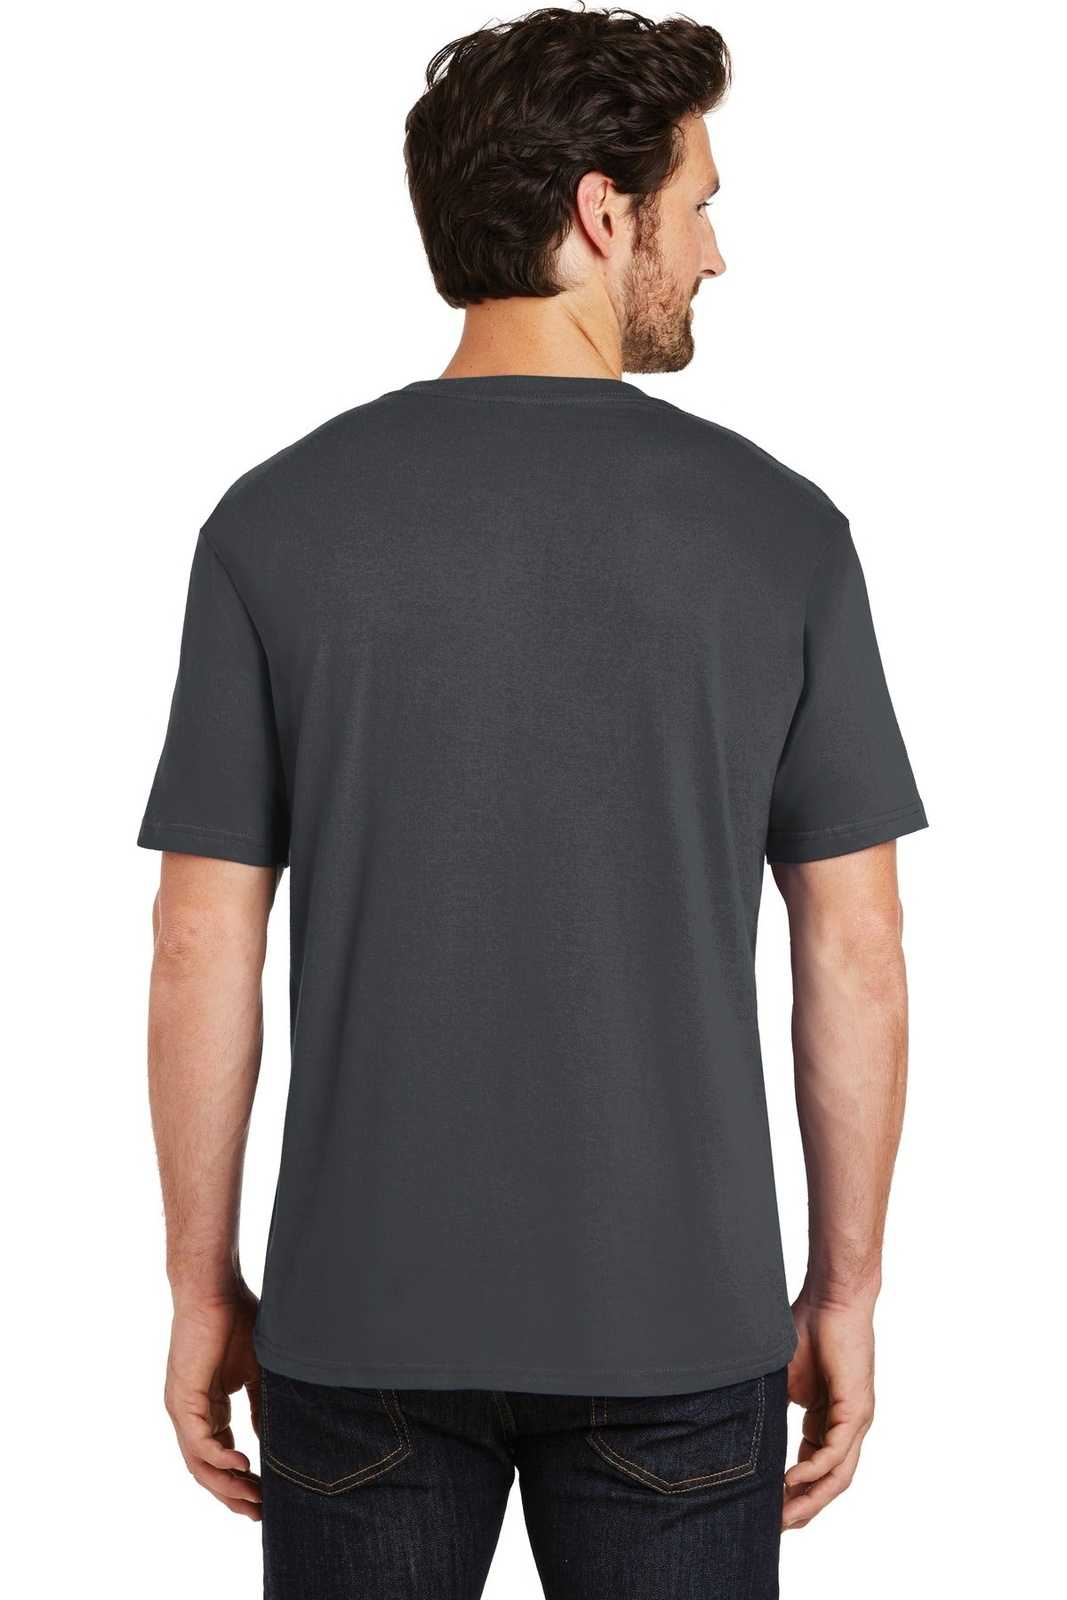 District DT104 Perfect Weight Tee - Charcoal - HIT a Double - 2